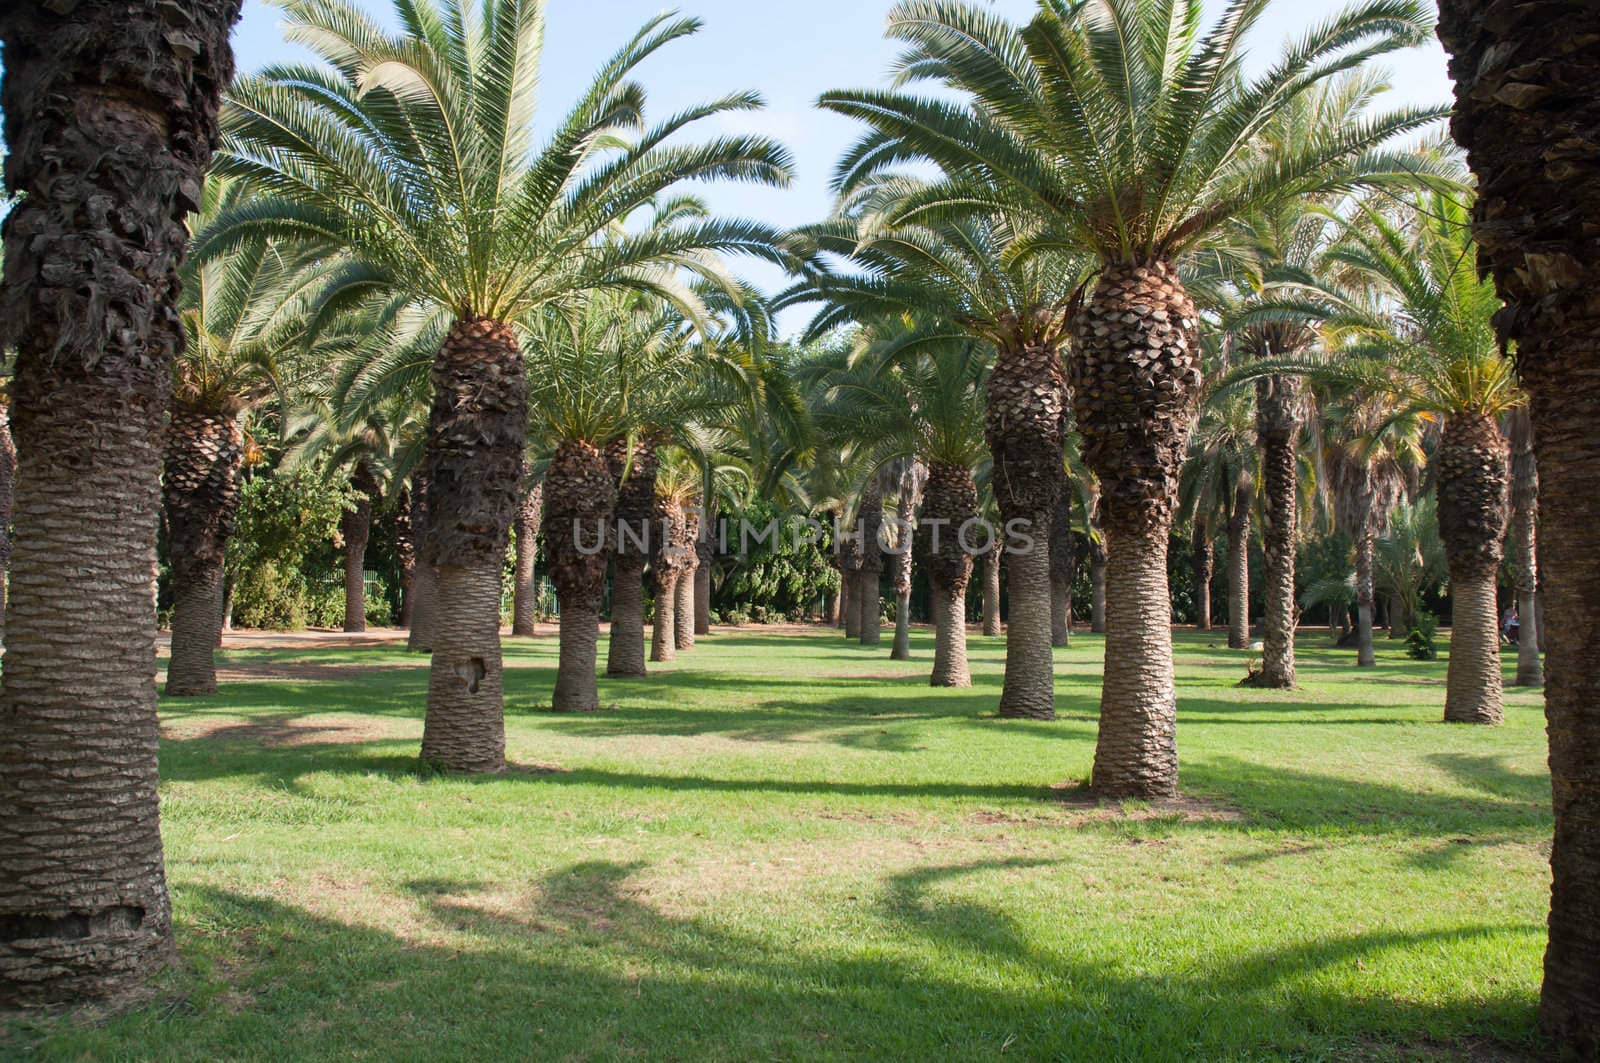 Image date palms grove of trees.